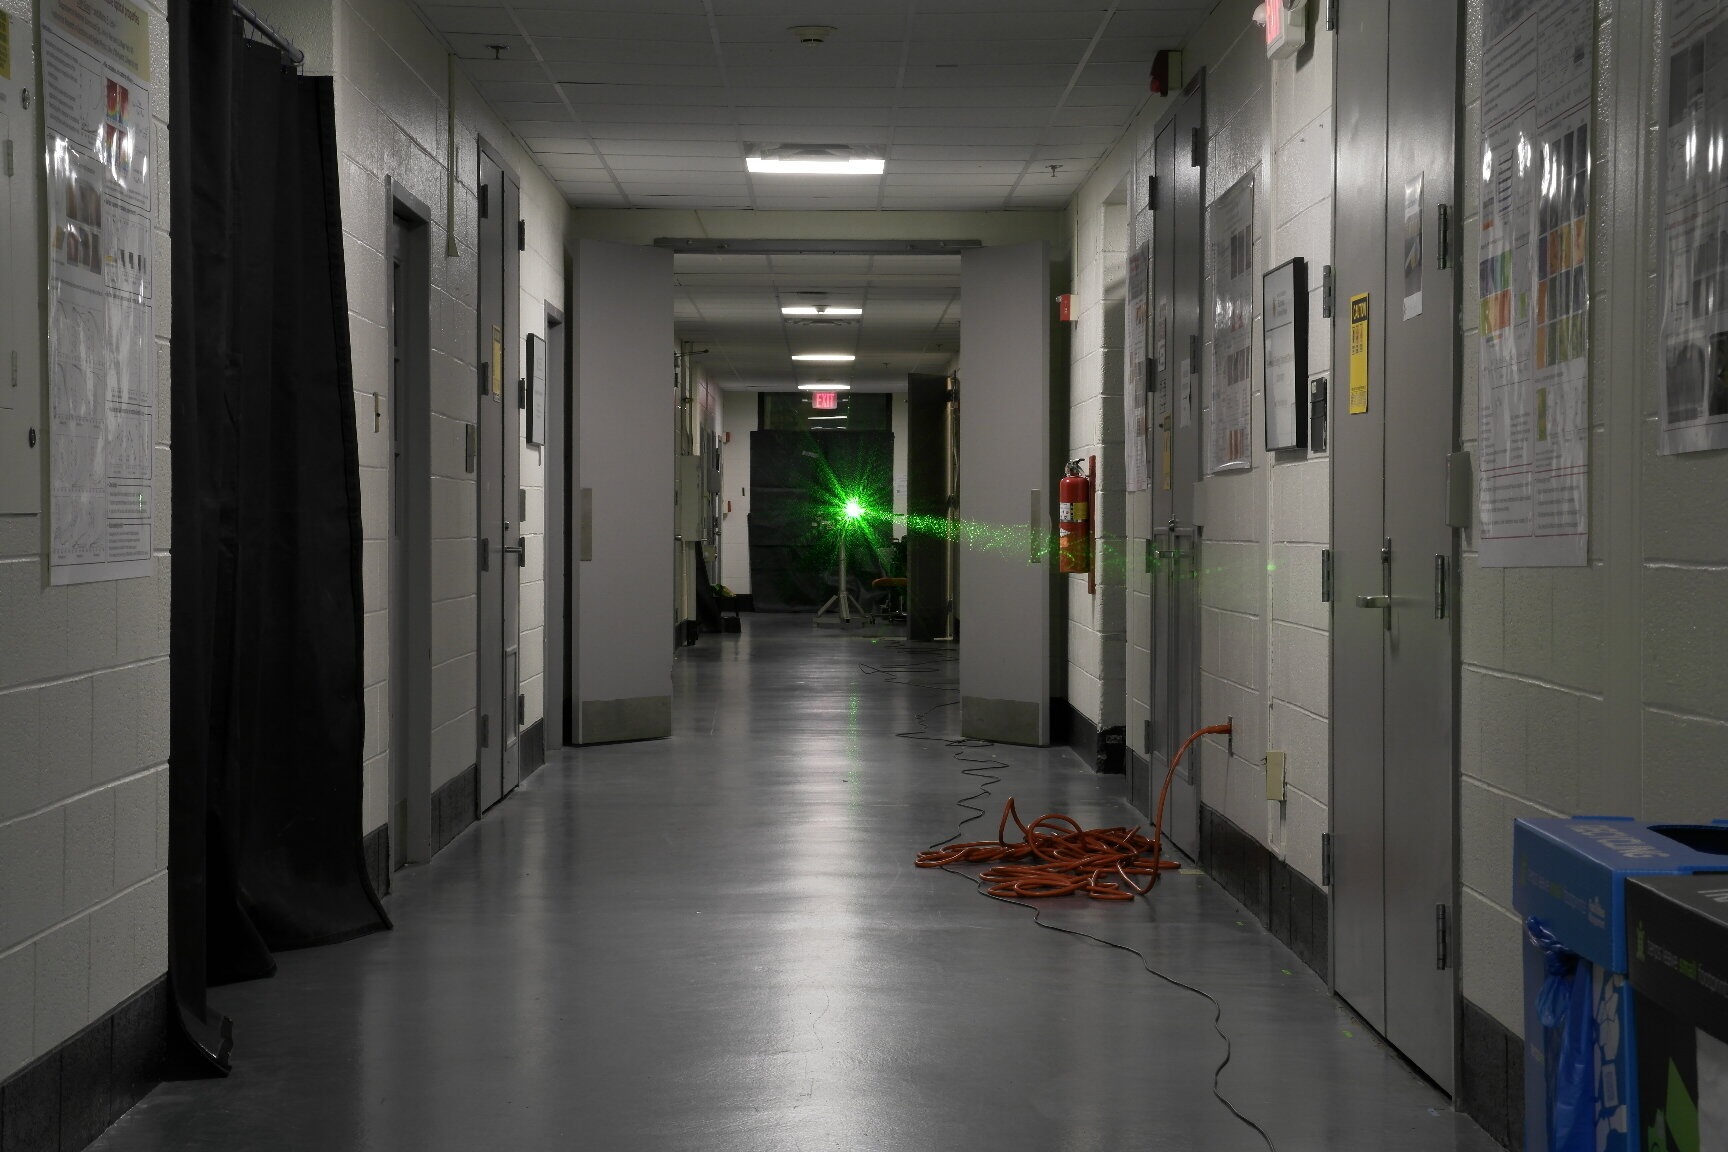 A 50-meter laser experiment sets a record in the university’s corridor